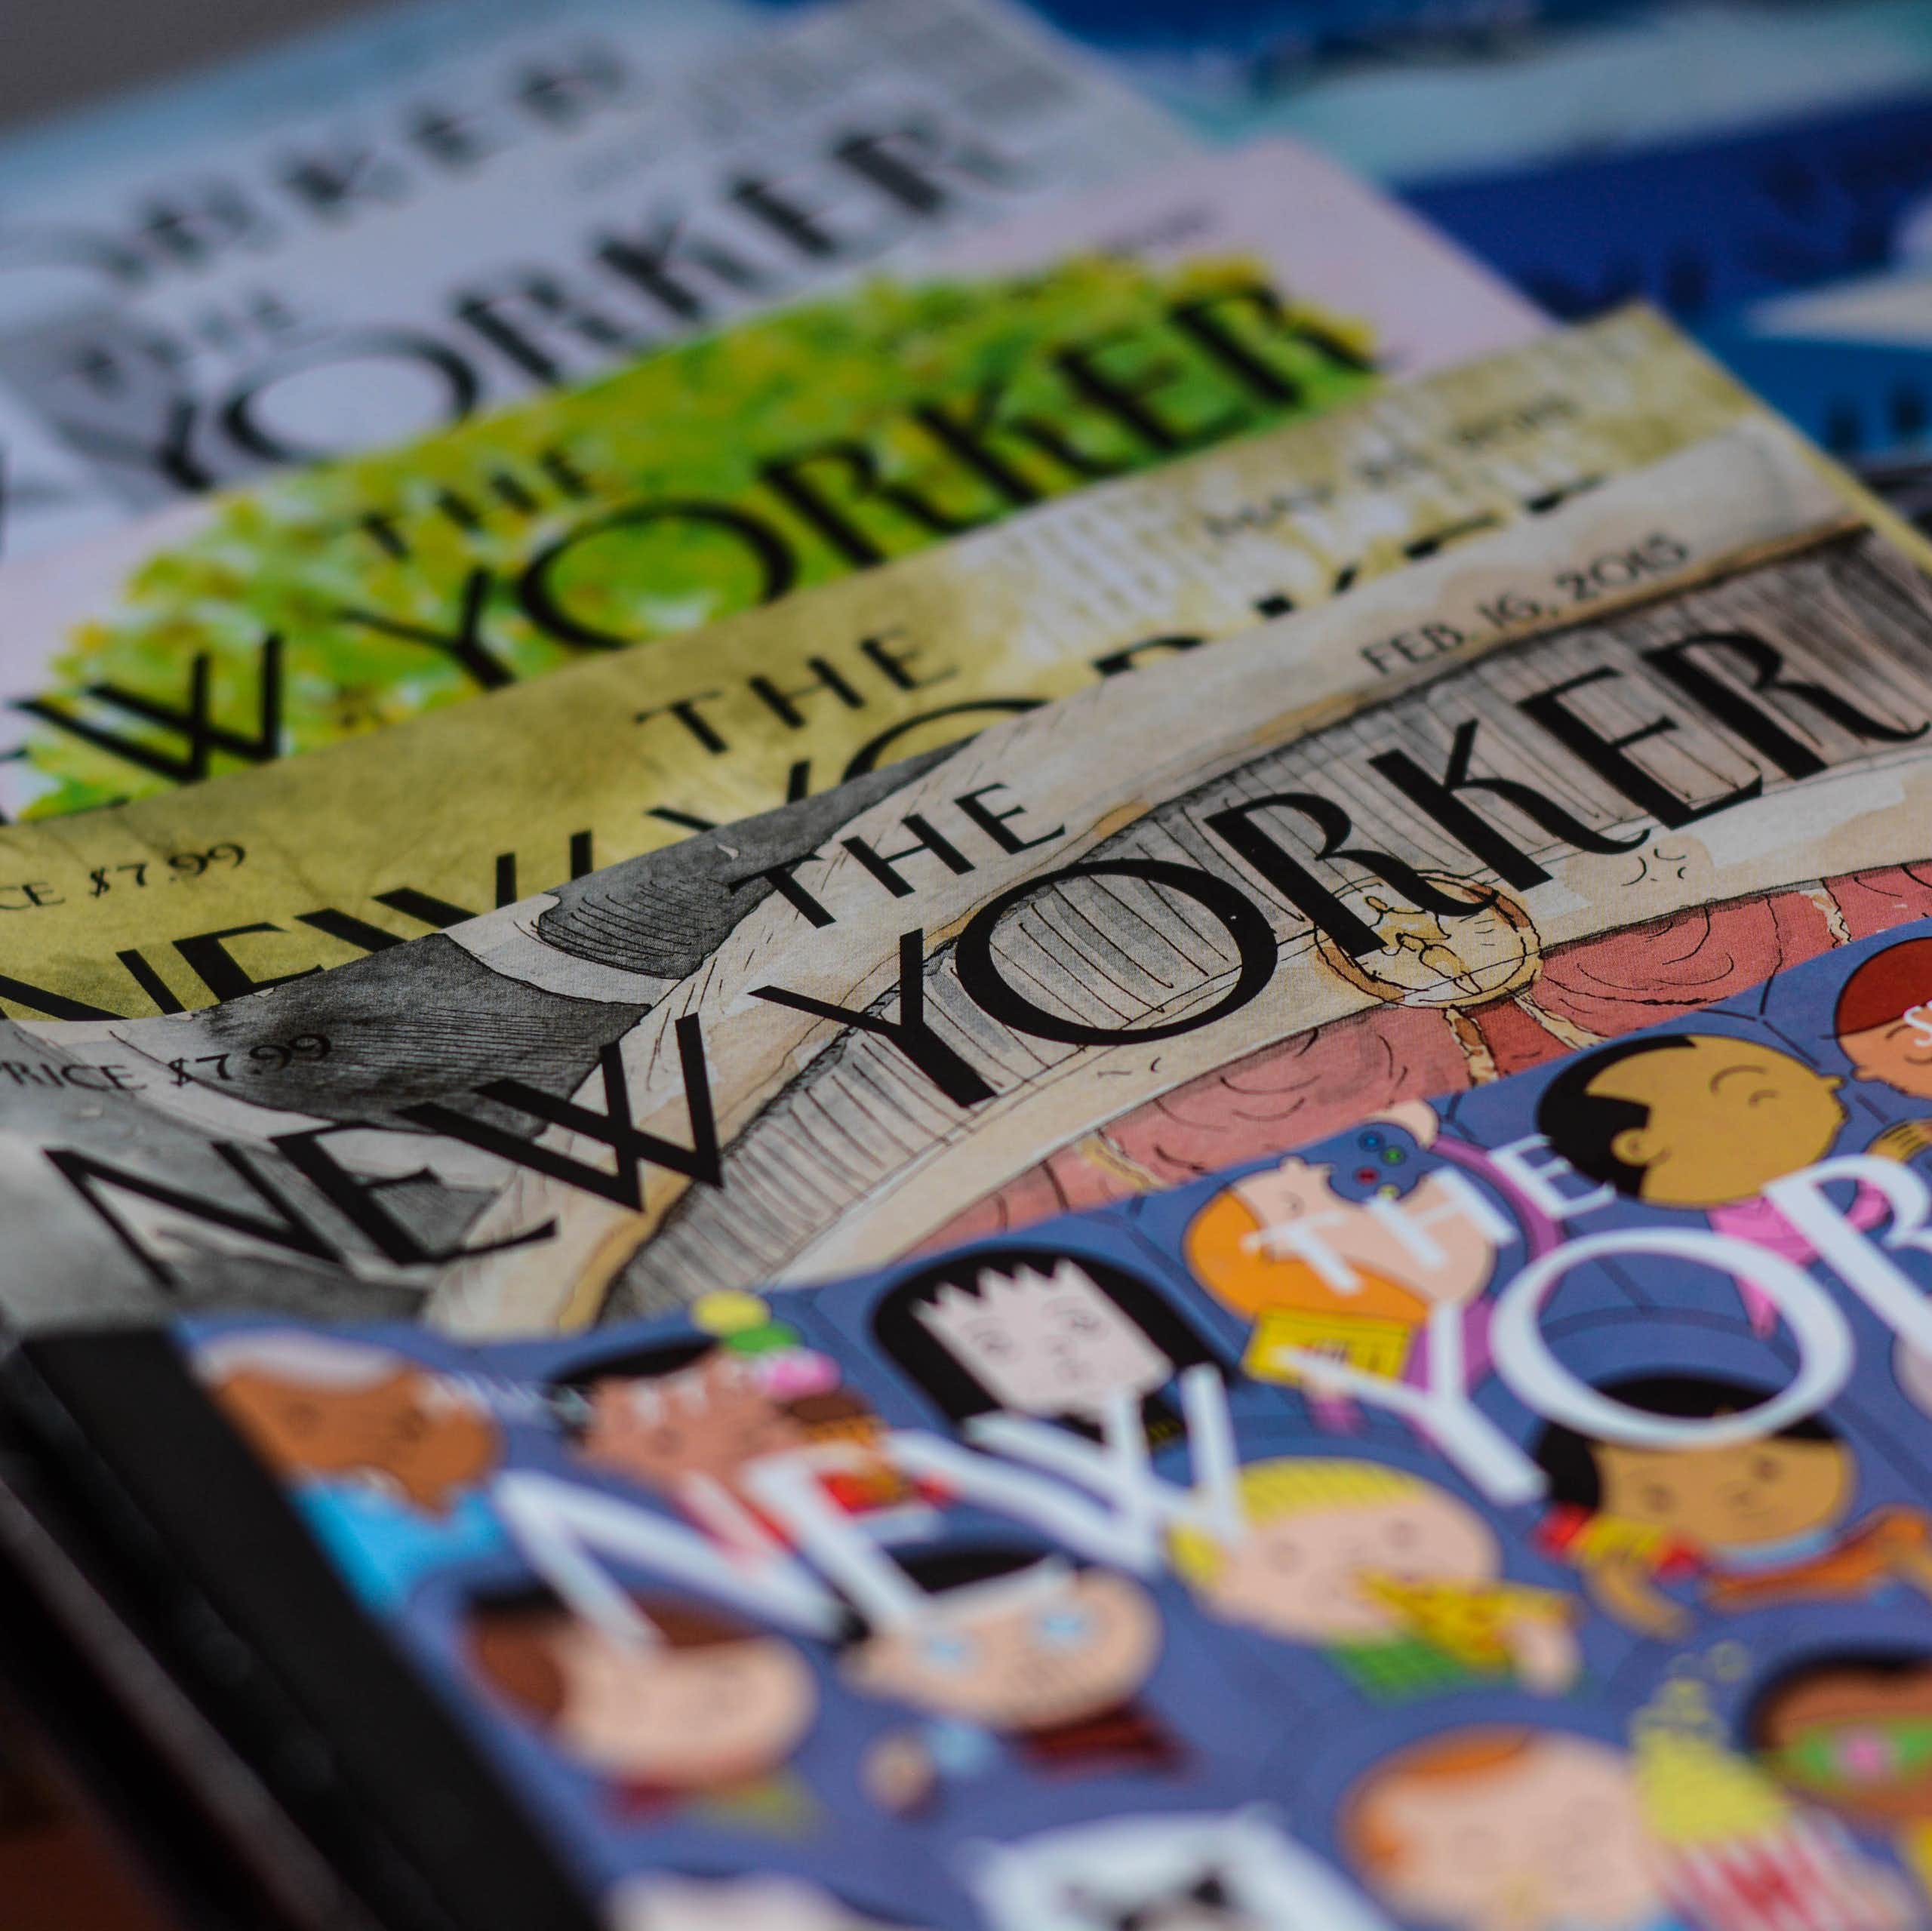 A stack of old print editions of the New Yorker magazine